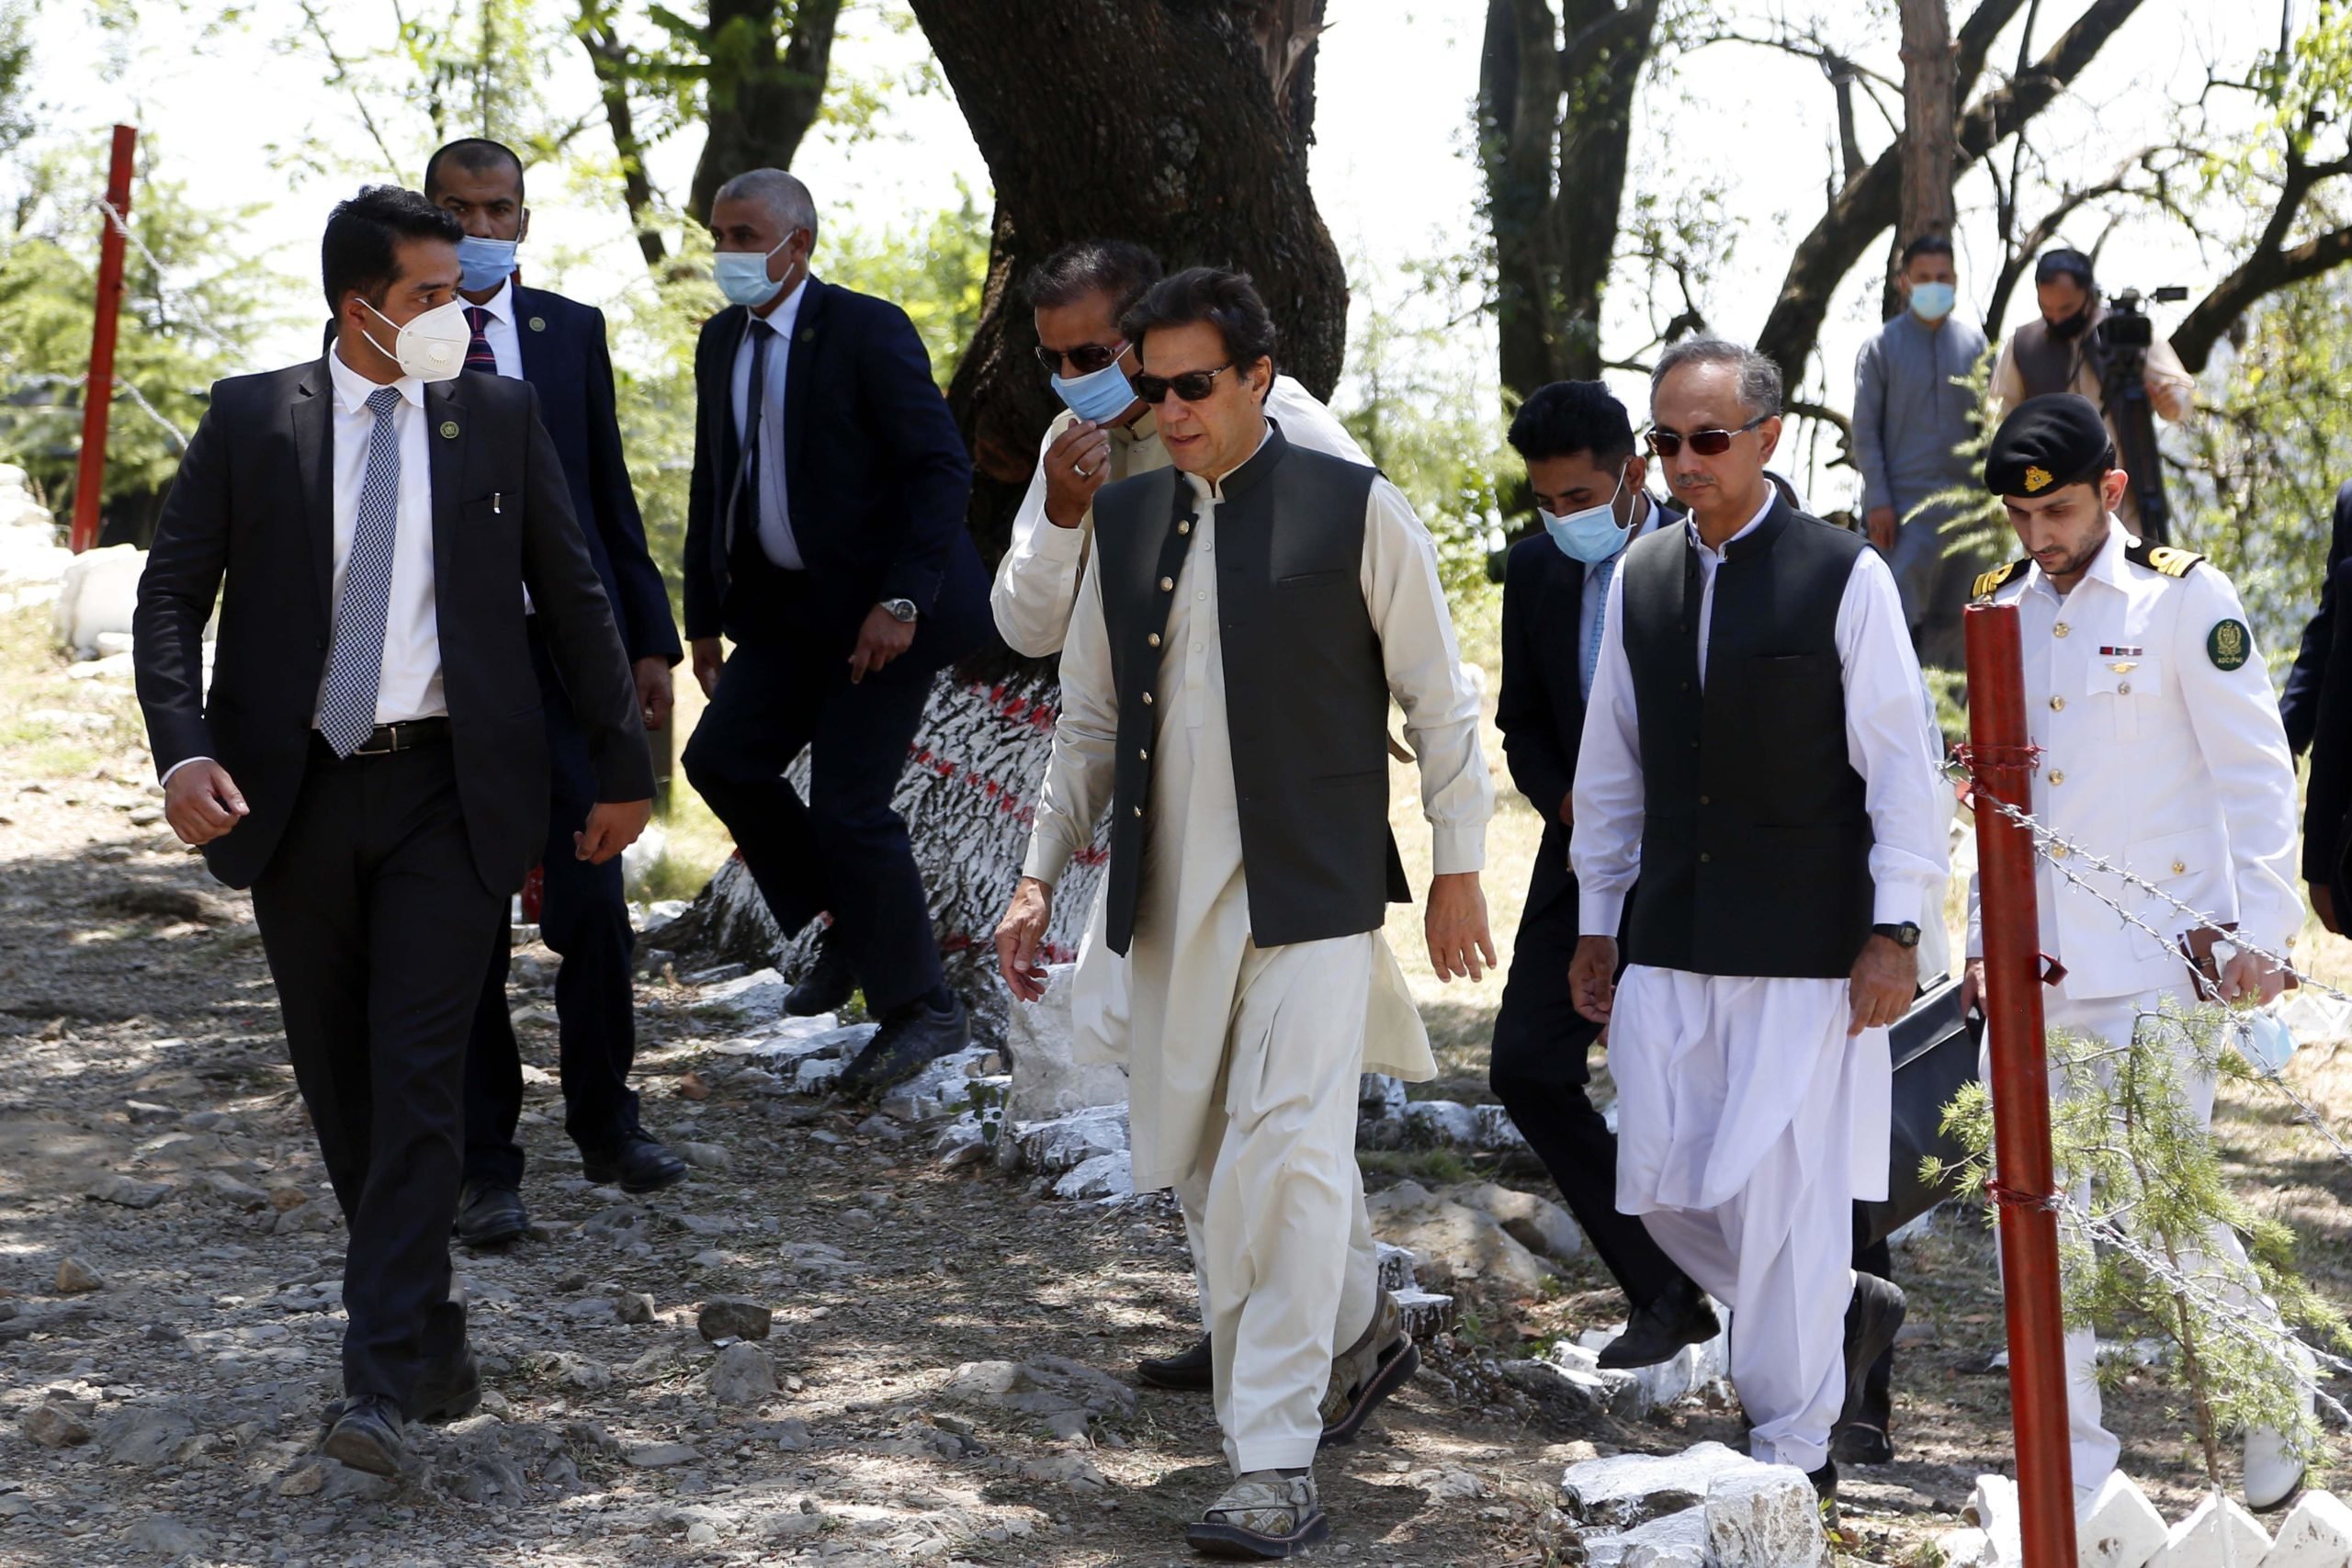 <p>Imran Khan, prime minister of Pakistan, (centre) returning from planting a tree as part of the 10 Billion Tree Tsunami programme in May 2021 (Image: Xinhua / Alamy)</p>